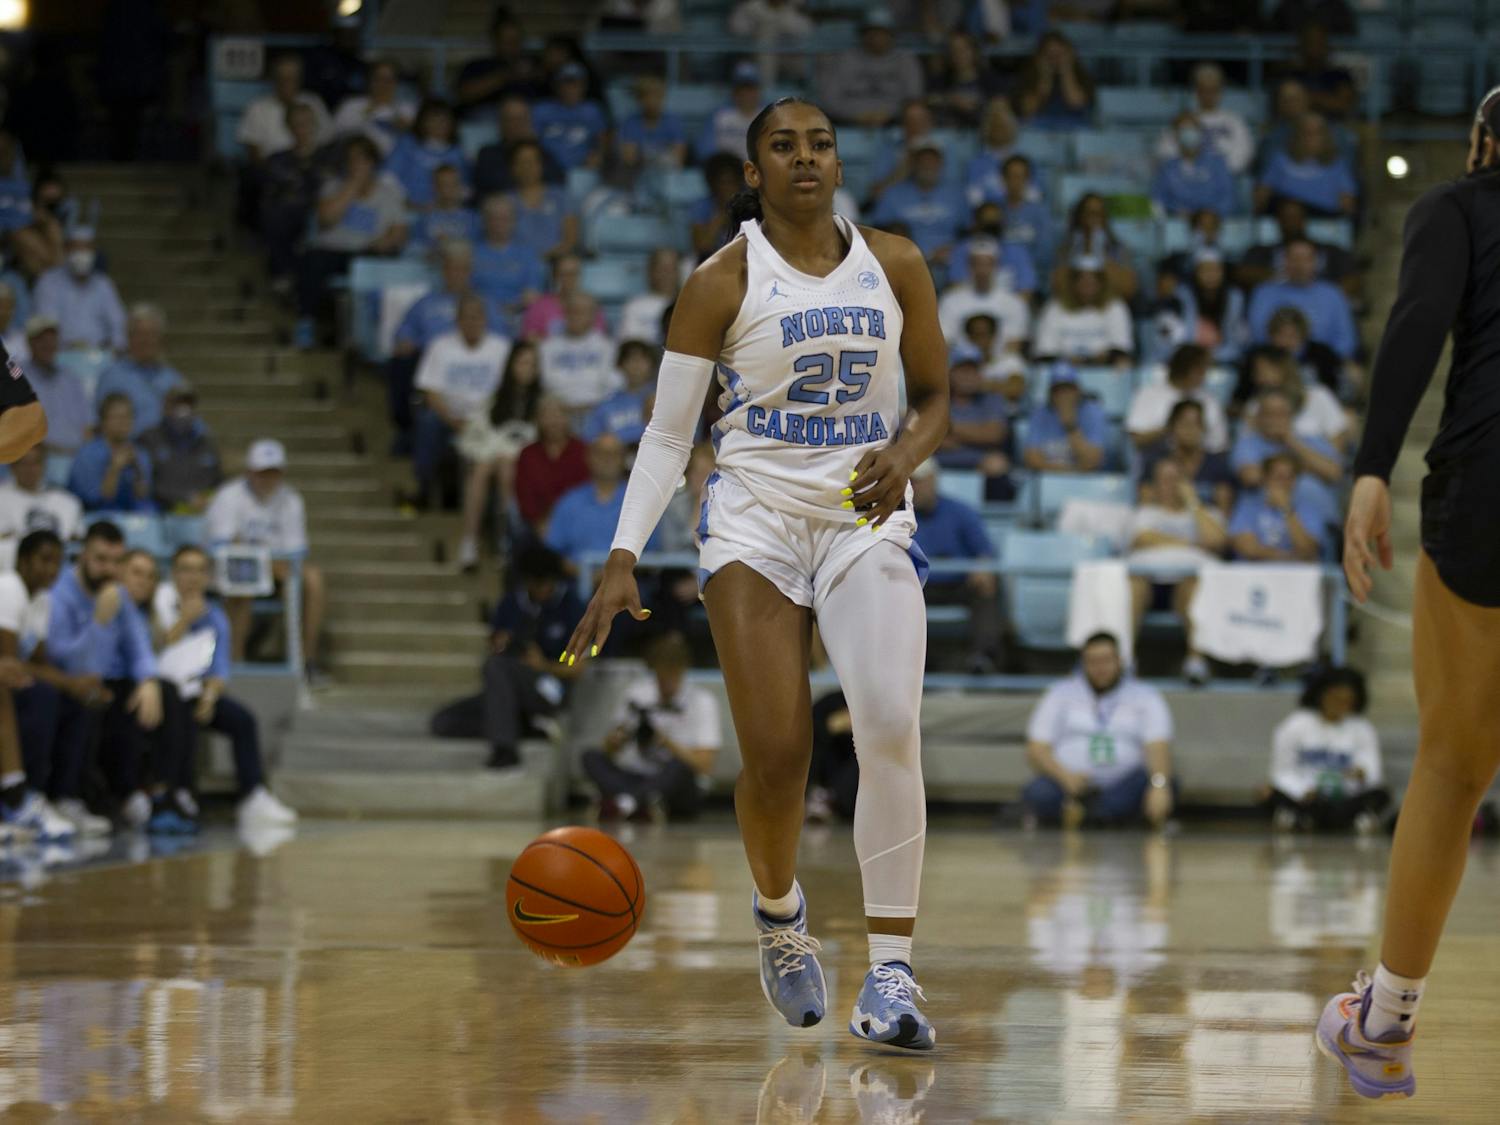 Junior guard Deja Kelly (25) dribbles the ball up court during the womens basketball game against Virginia Tech on Thursday, Feb. 23, 2023 at Carmichael Arena.